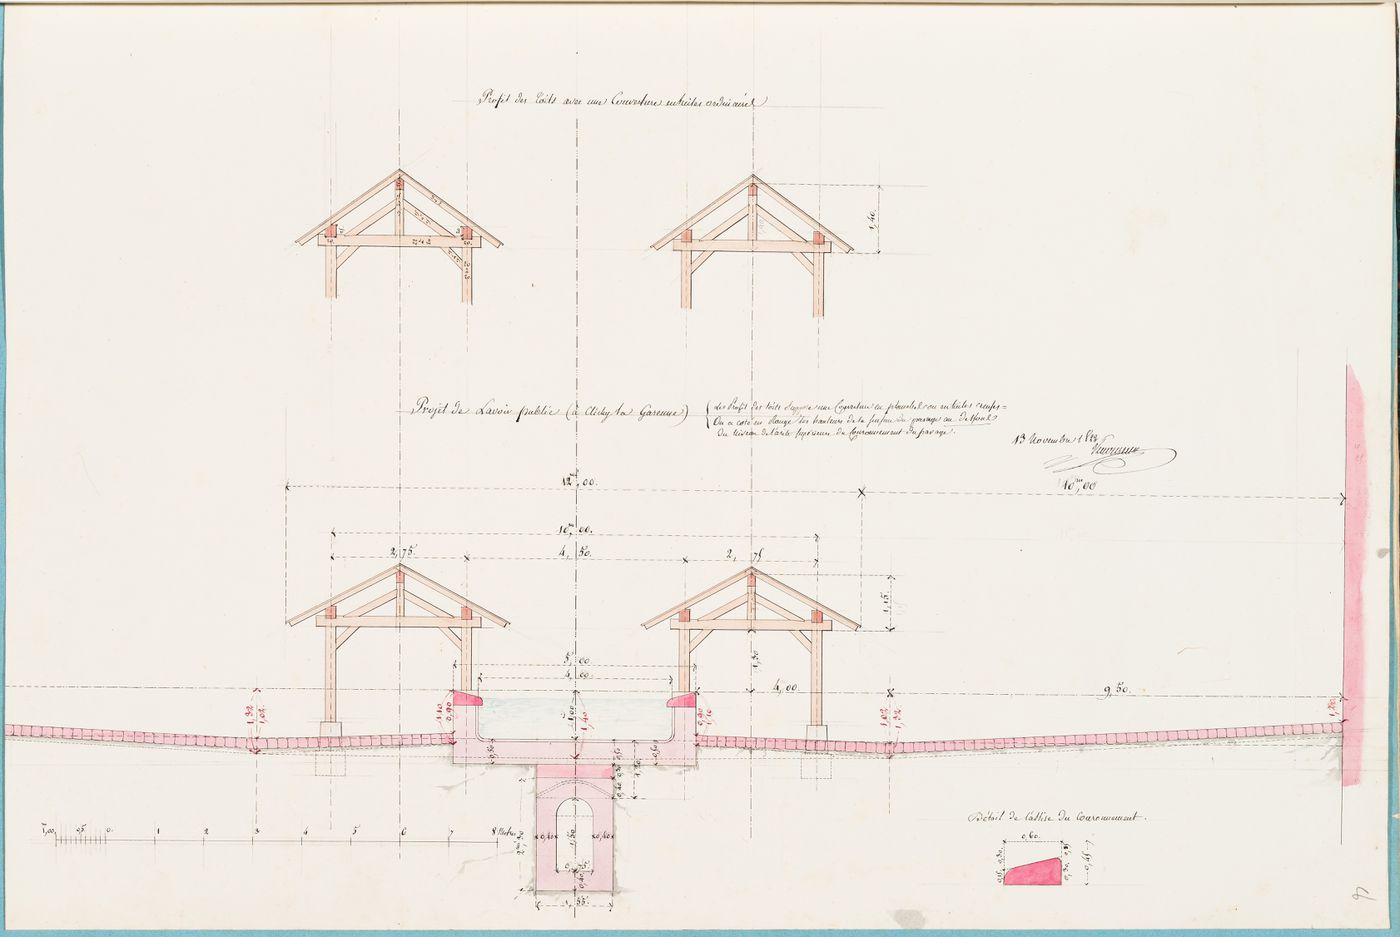 Sections and detail for the roofs for a washhouse, probably for Parc de Clichy